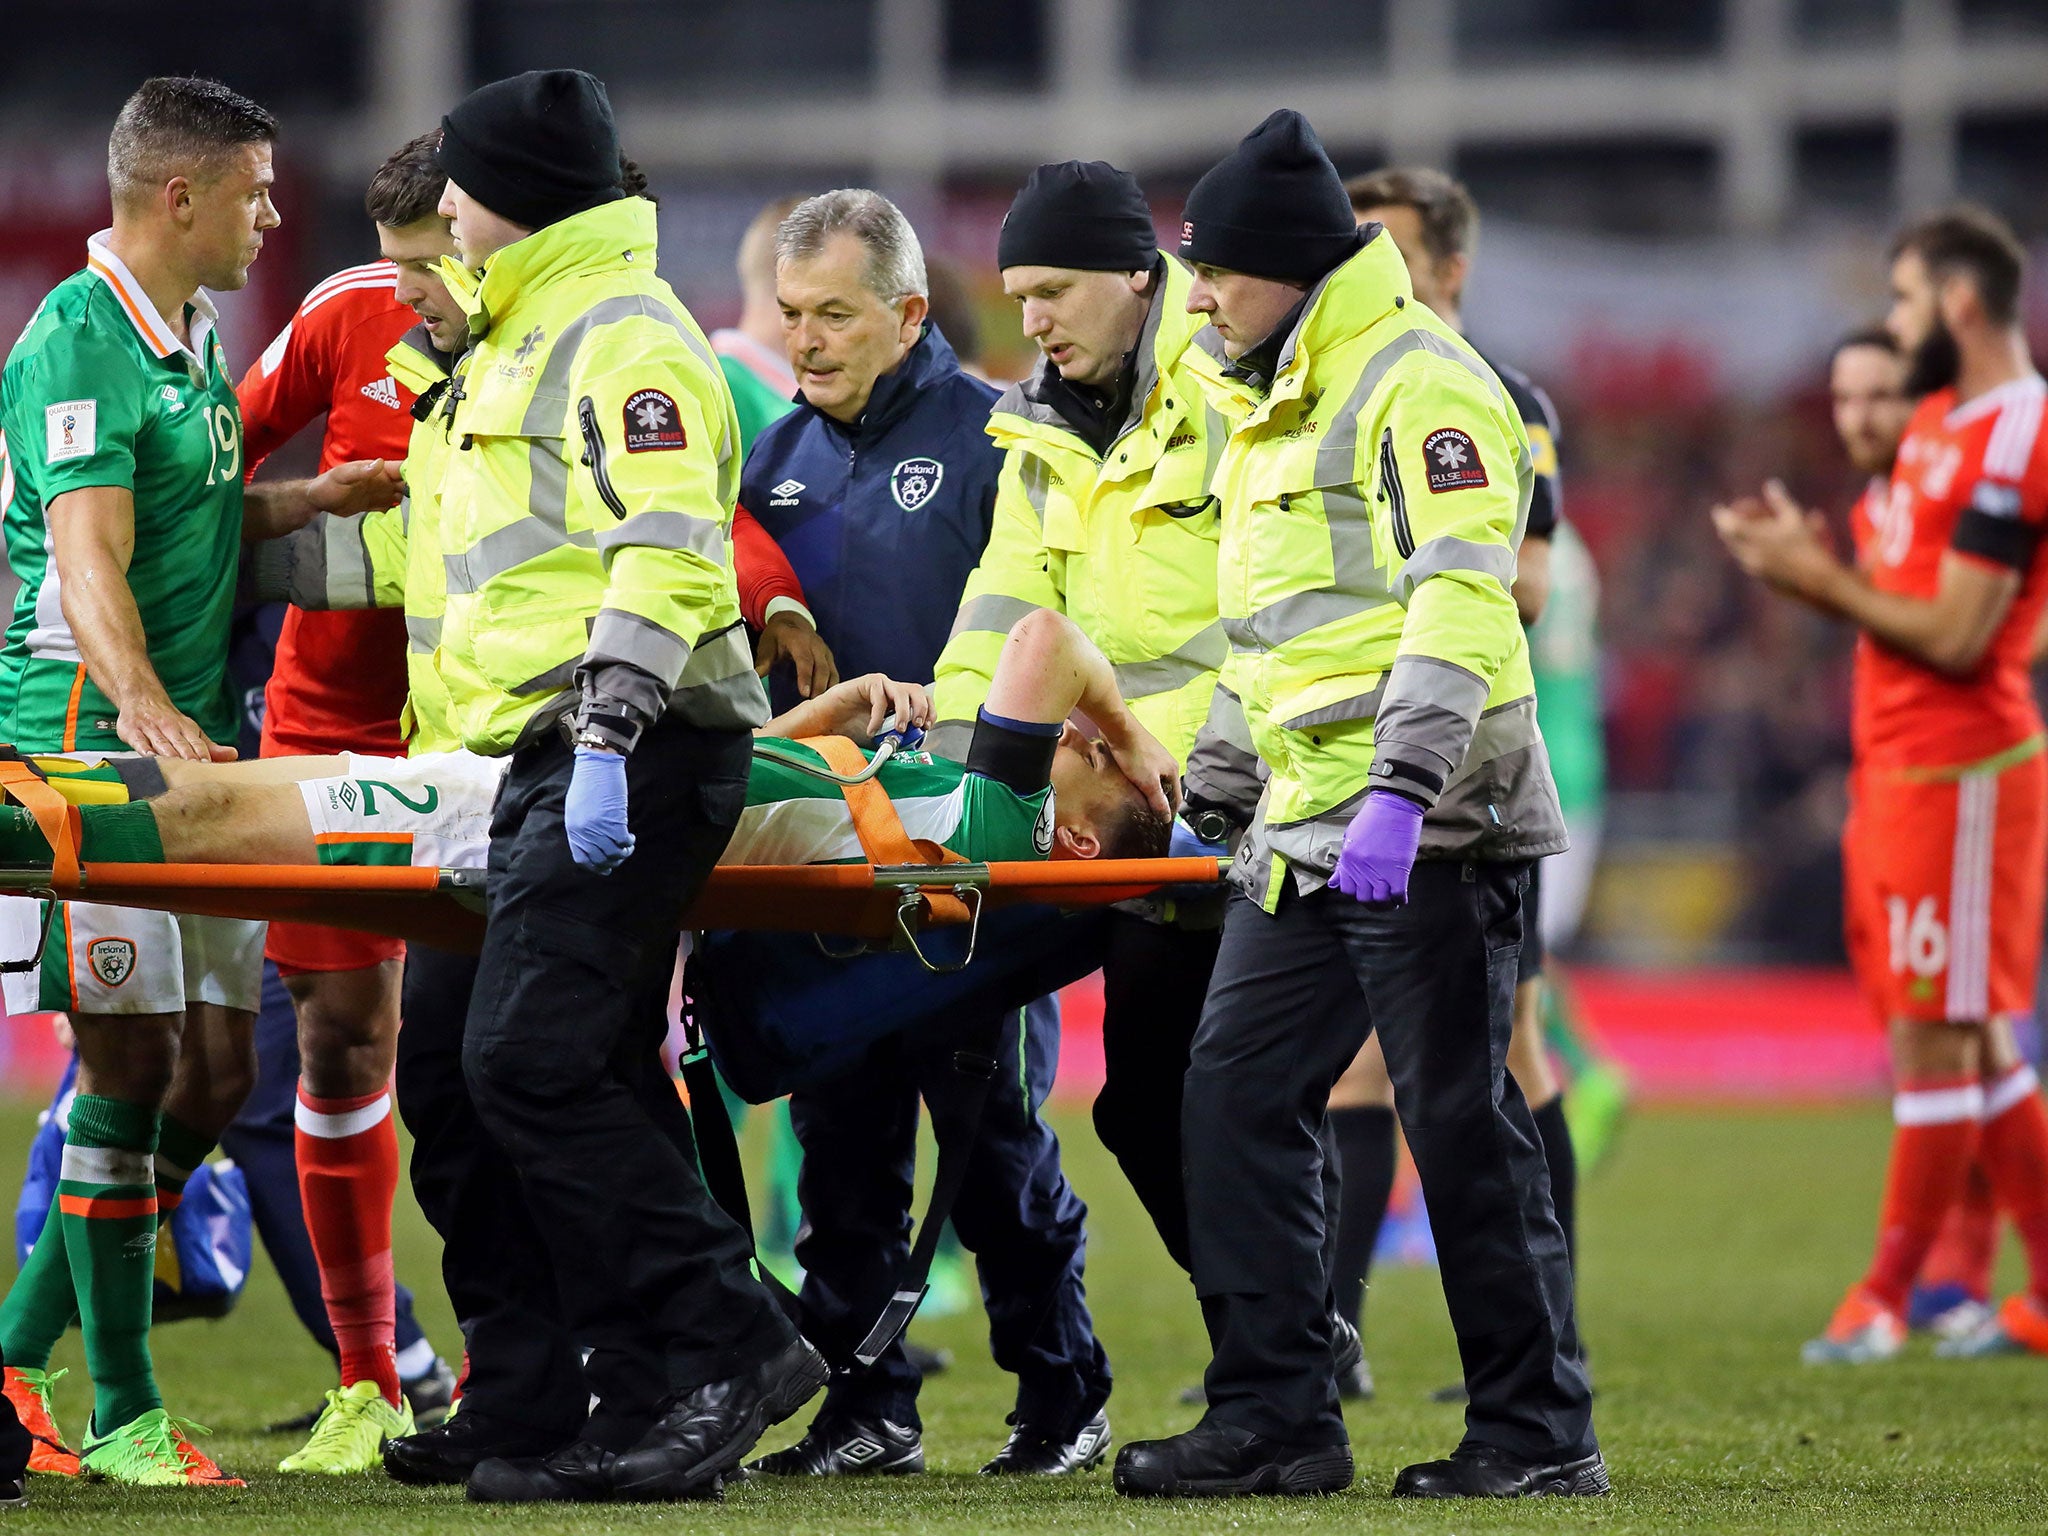 Coleman received oxygen following Taylor's challenge before being stretchered off